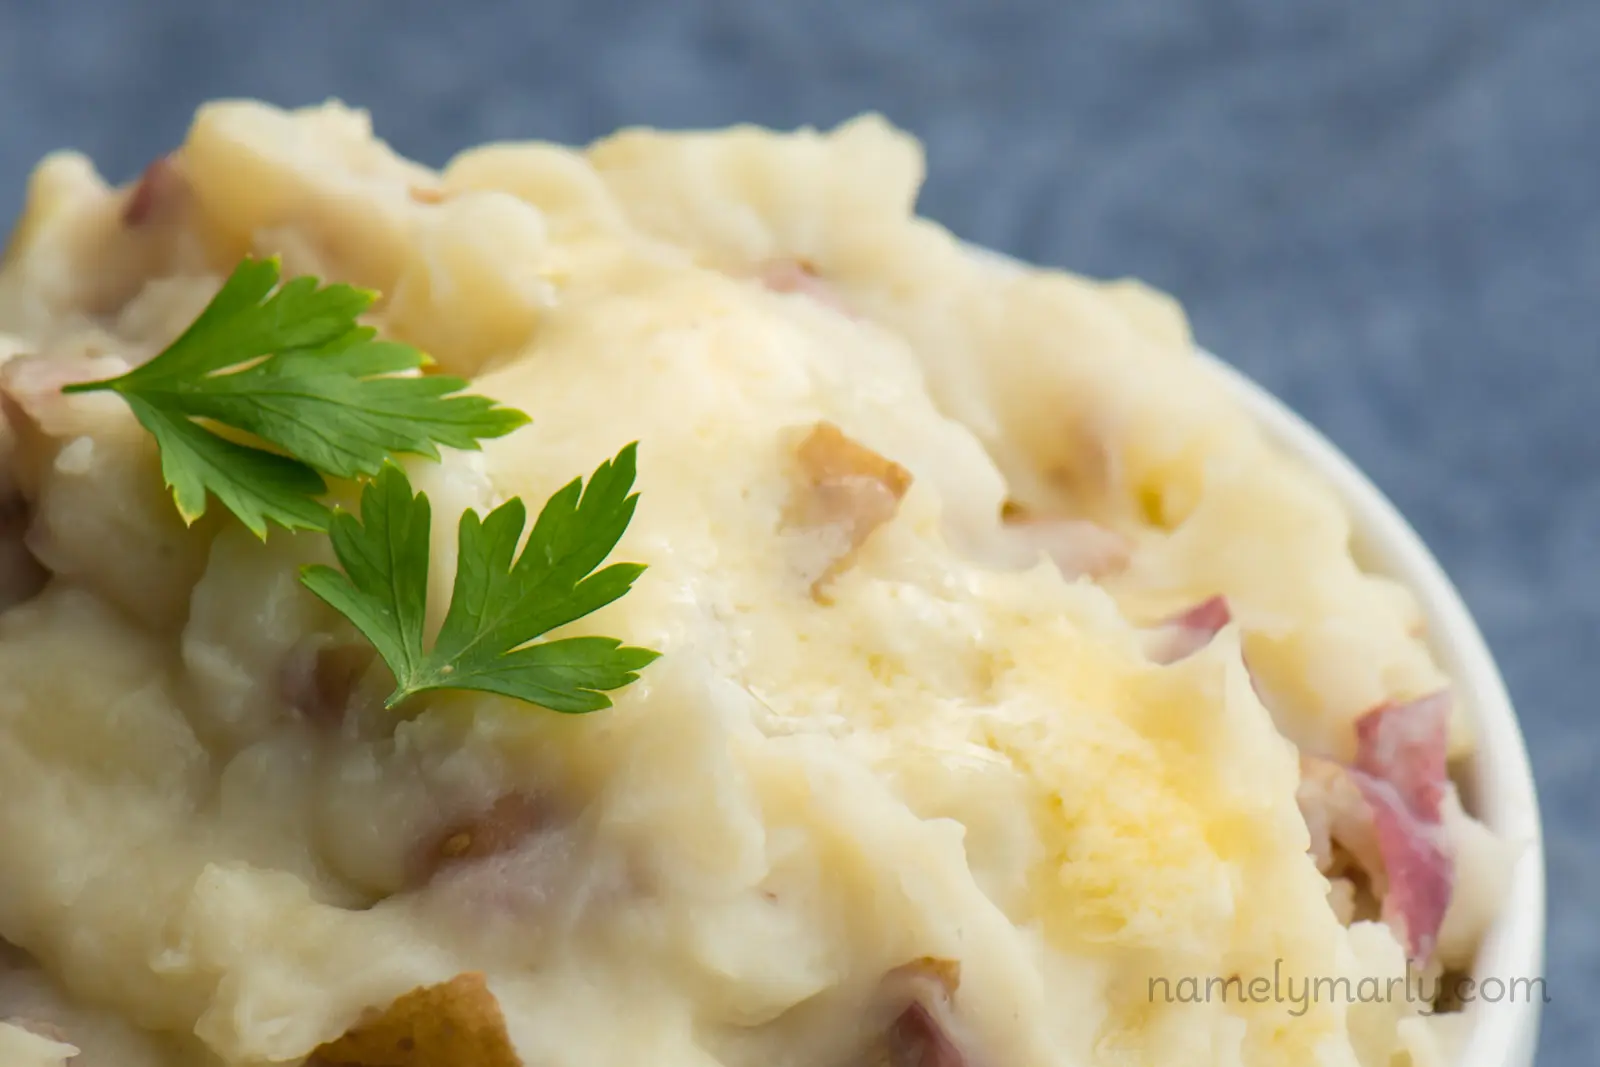 a bowl of vegan garlic mashed potatoes with melted butter on top and two parsley sprigs.